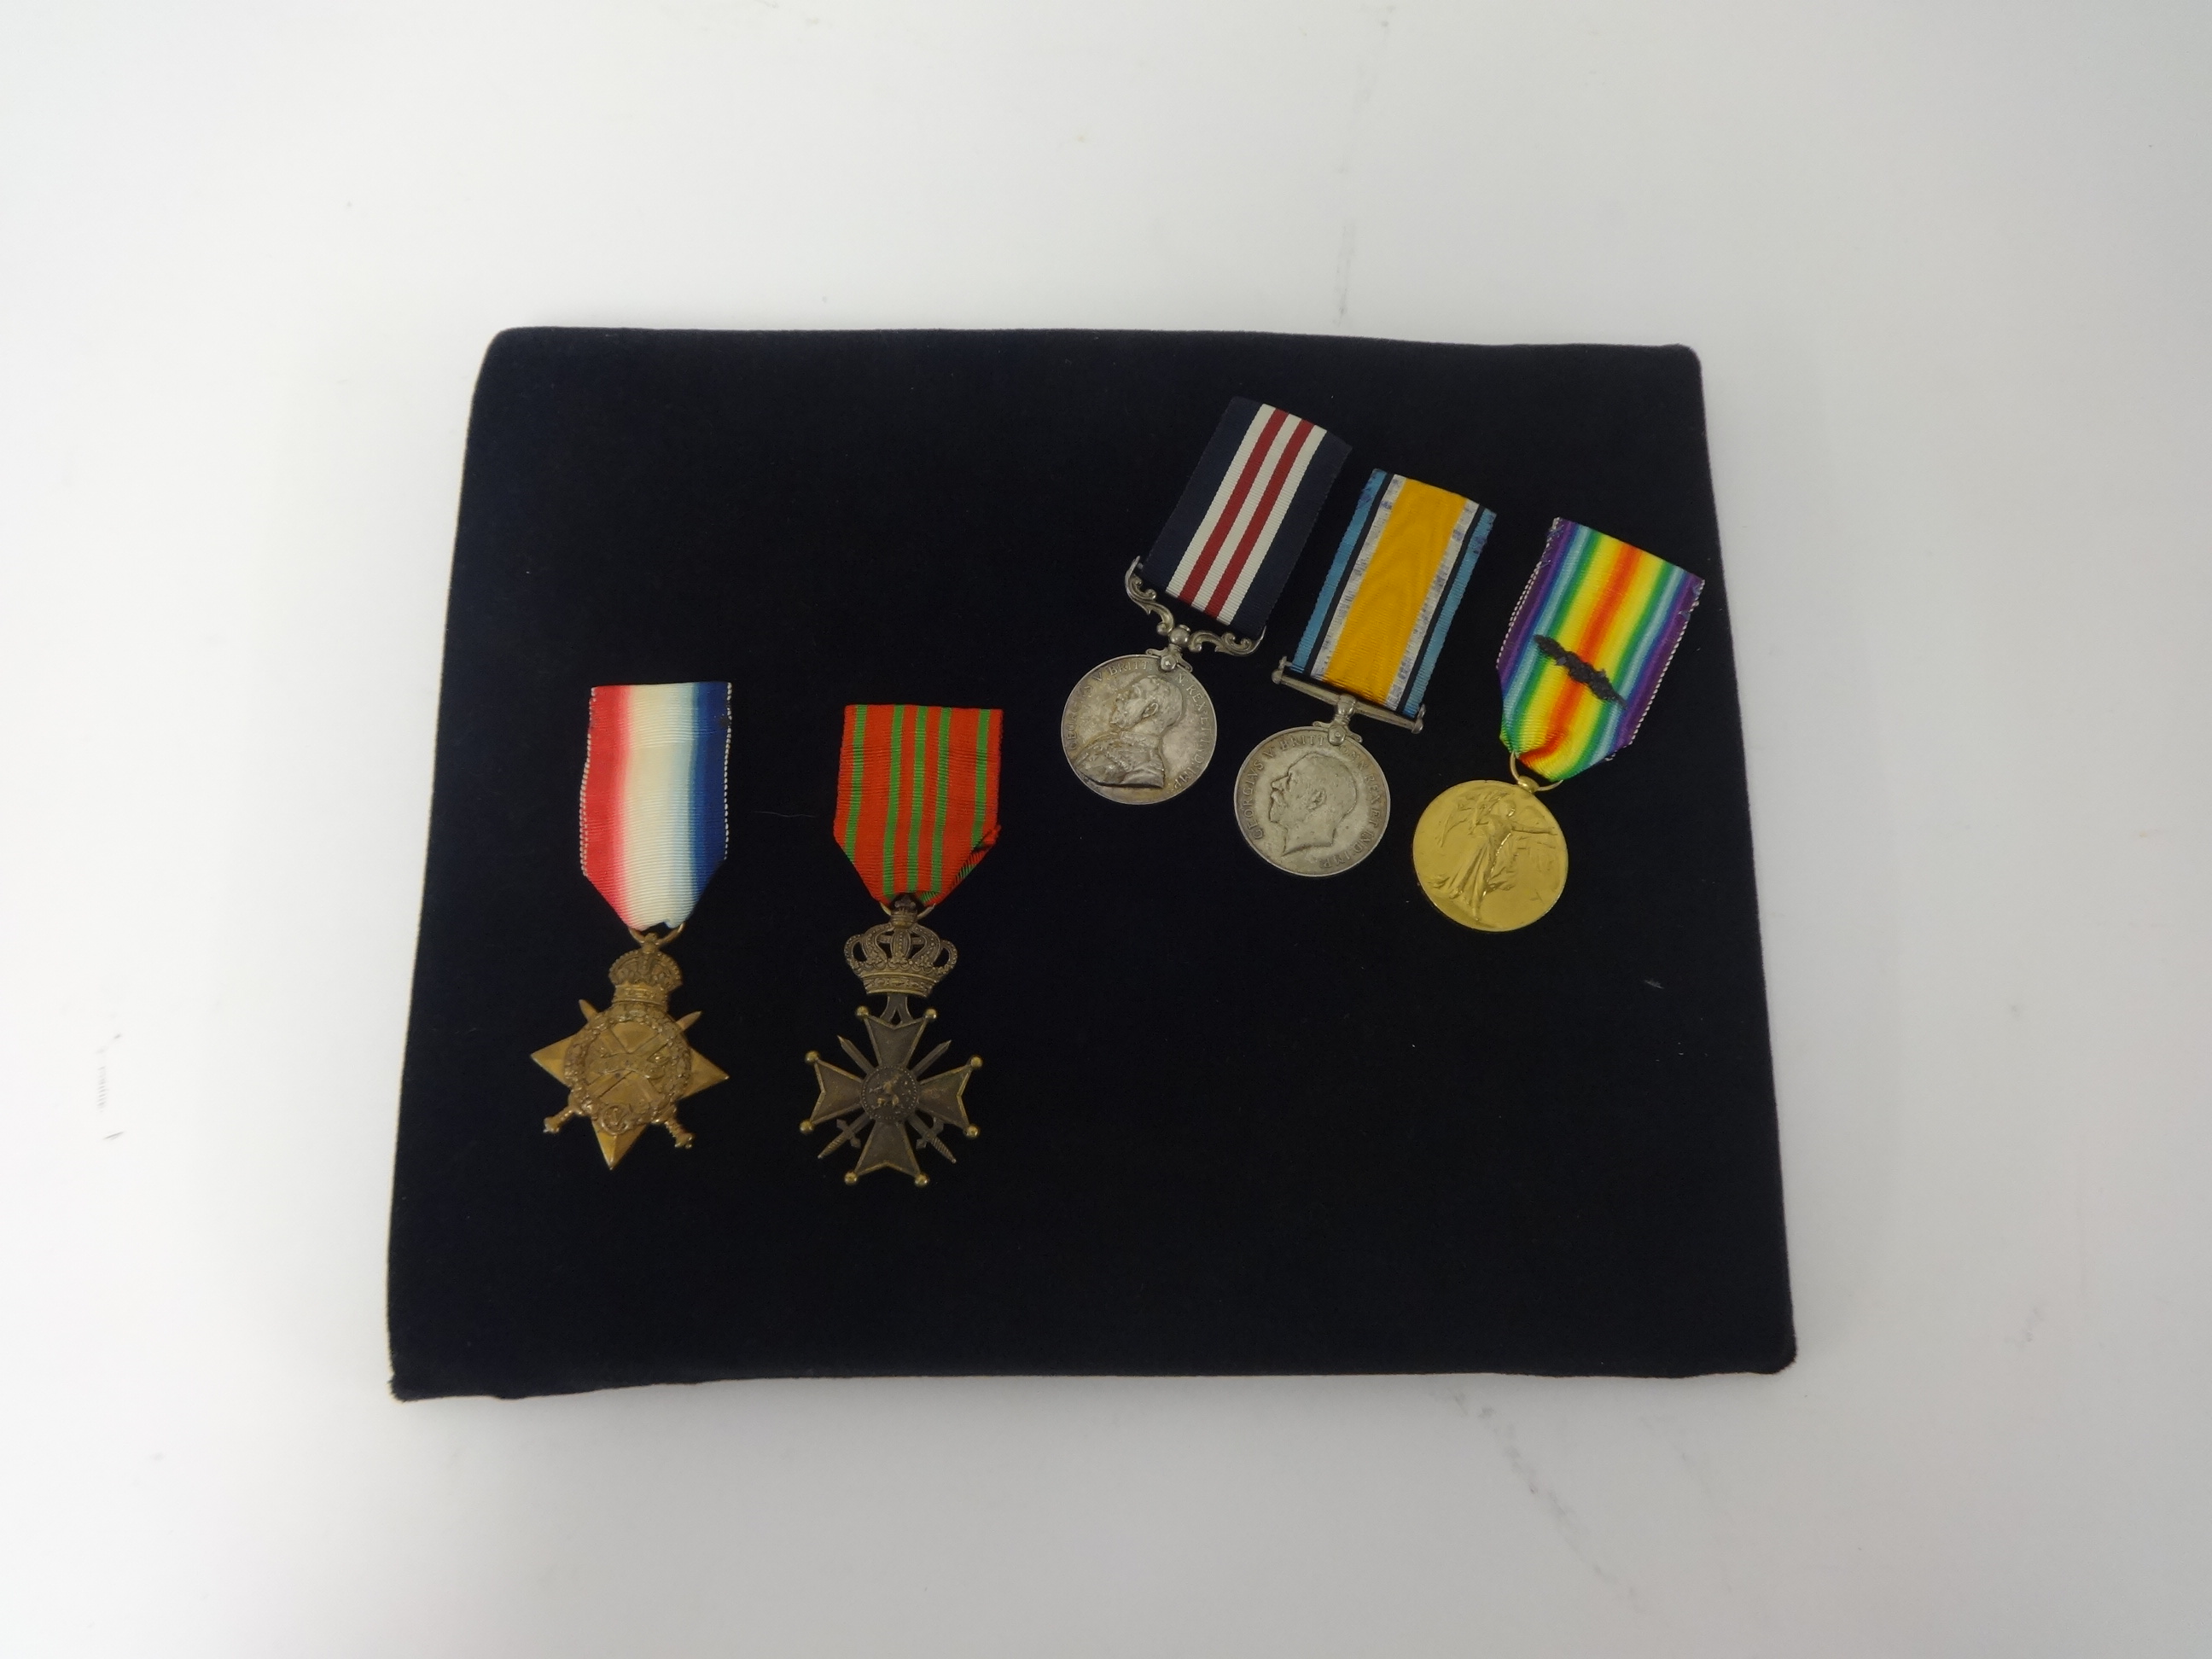 Five Great War Medals including the Military Medal (MM) awarded to SGT. A. (Arthur) BOUGHTON 1/ - Image 6 of 6